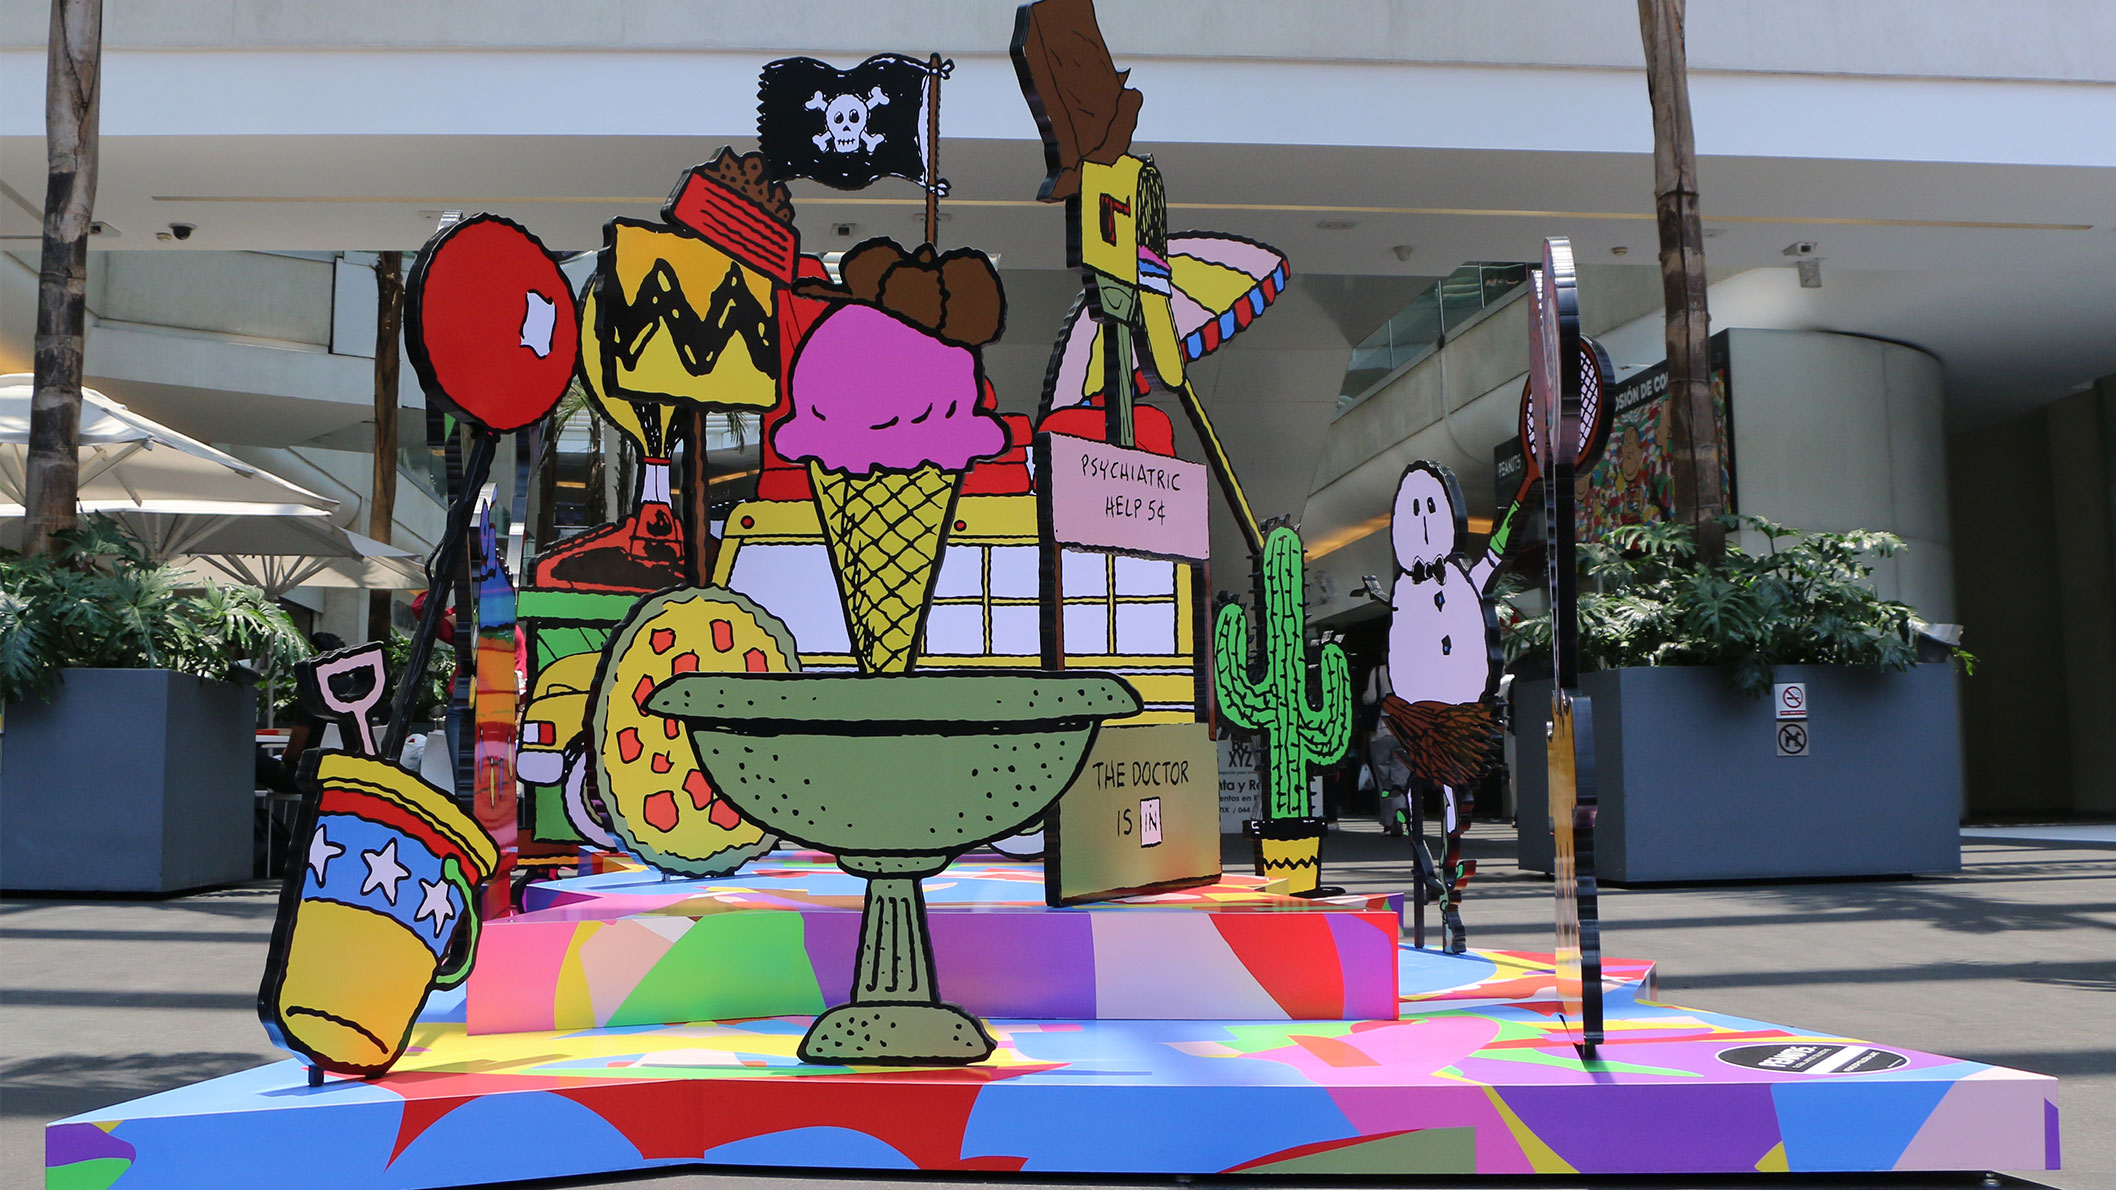 A colourful, 3D piece of art with many random objects including an icecream cone, a beach umbrella, and a school bus.